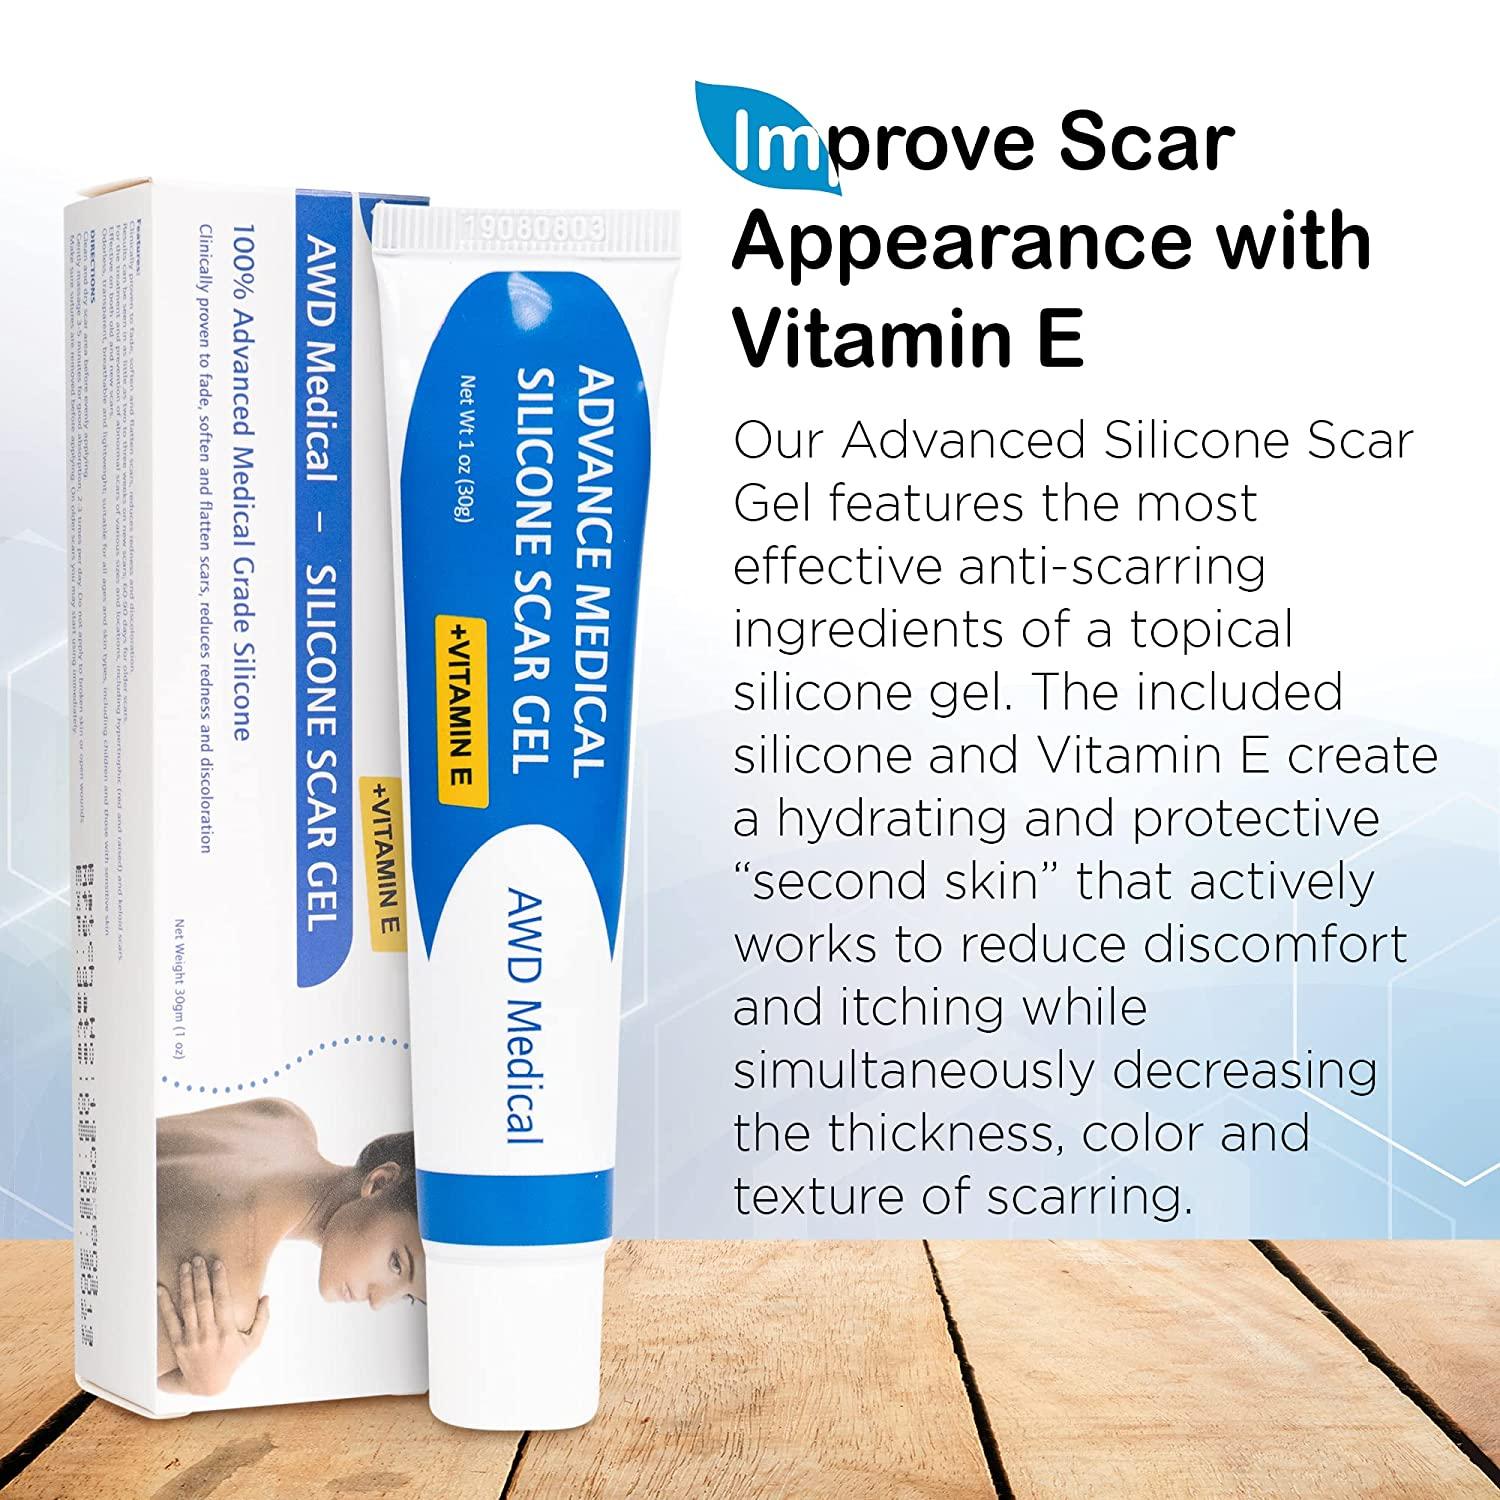 AWD Medical Silicone Gel - Scar Removal For Old & New Scars, Protective  Skin Care Cream, Helps Surgery Recovery, Acne Scar Treatment For Face &  Back, Healing Ointment With Vitamin E Oil